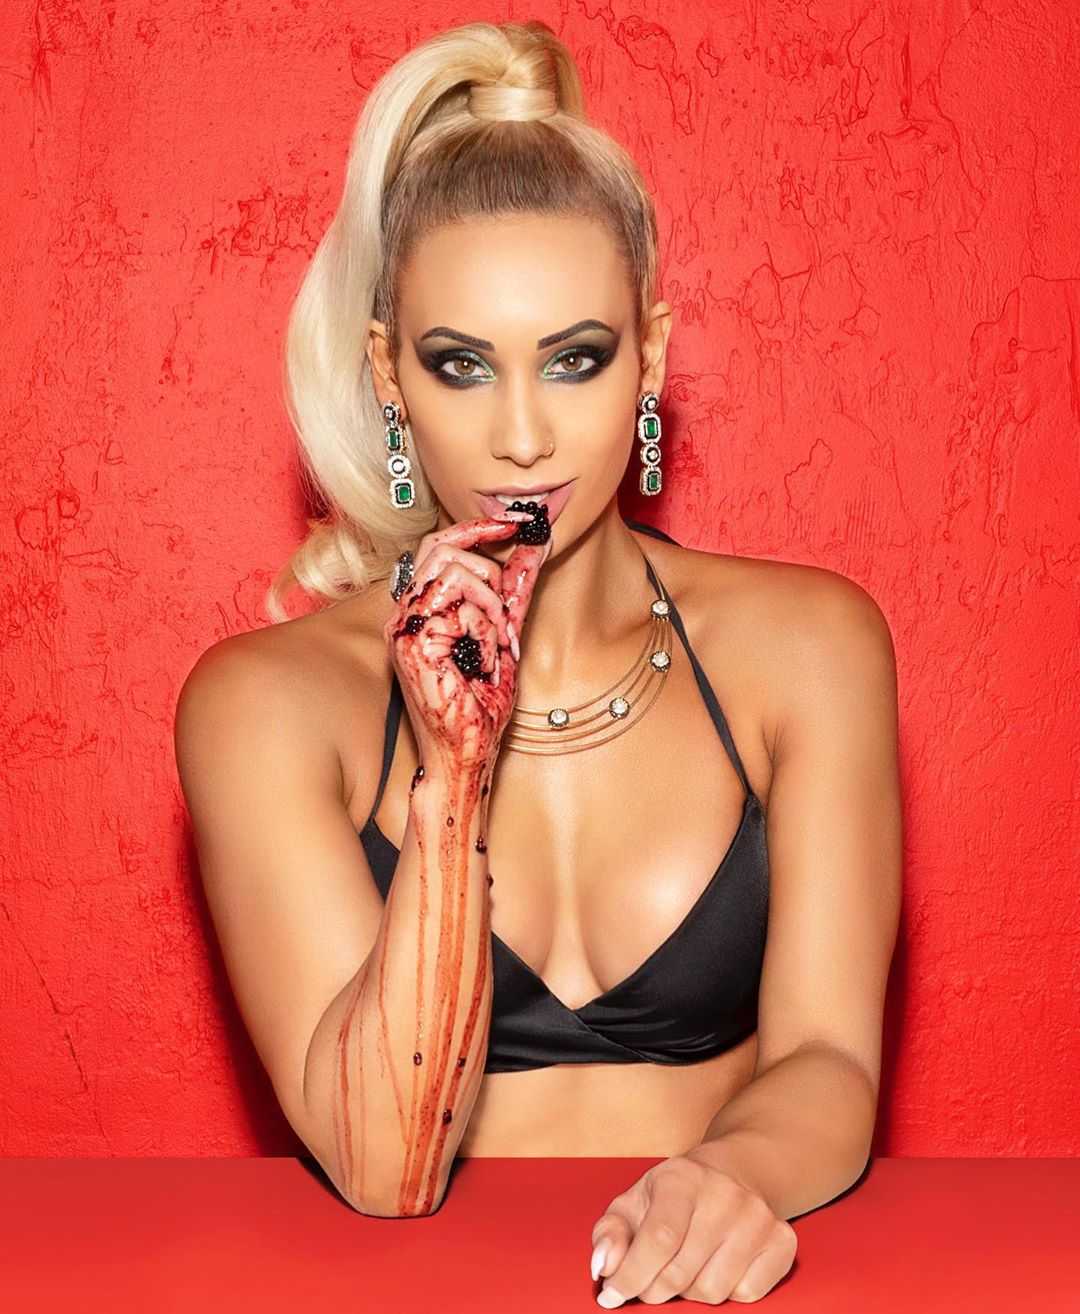 75+ Hot Pictures Of Carmella WWE Diva Will Make You Fall In Love With Her | Best Of Comic Books